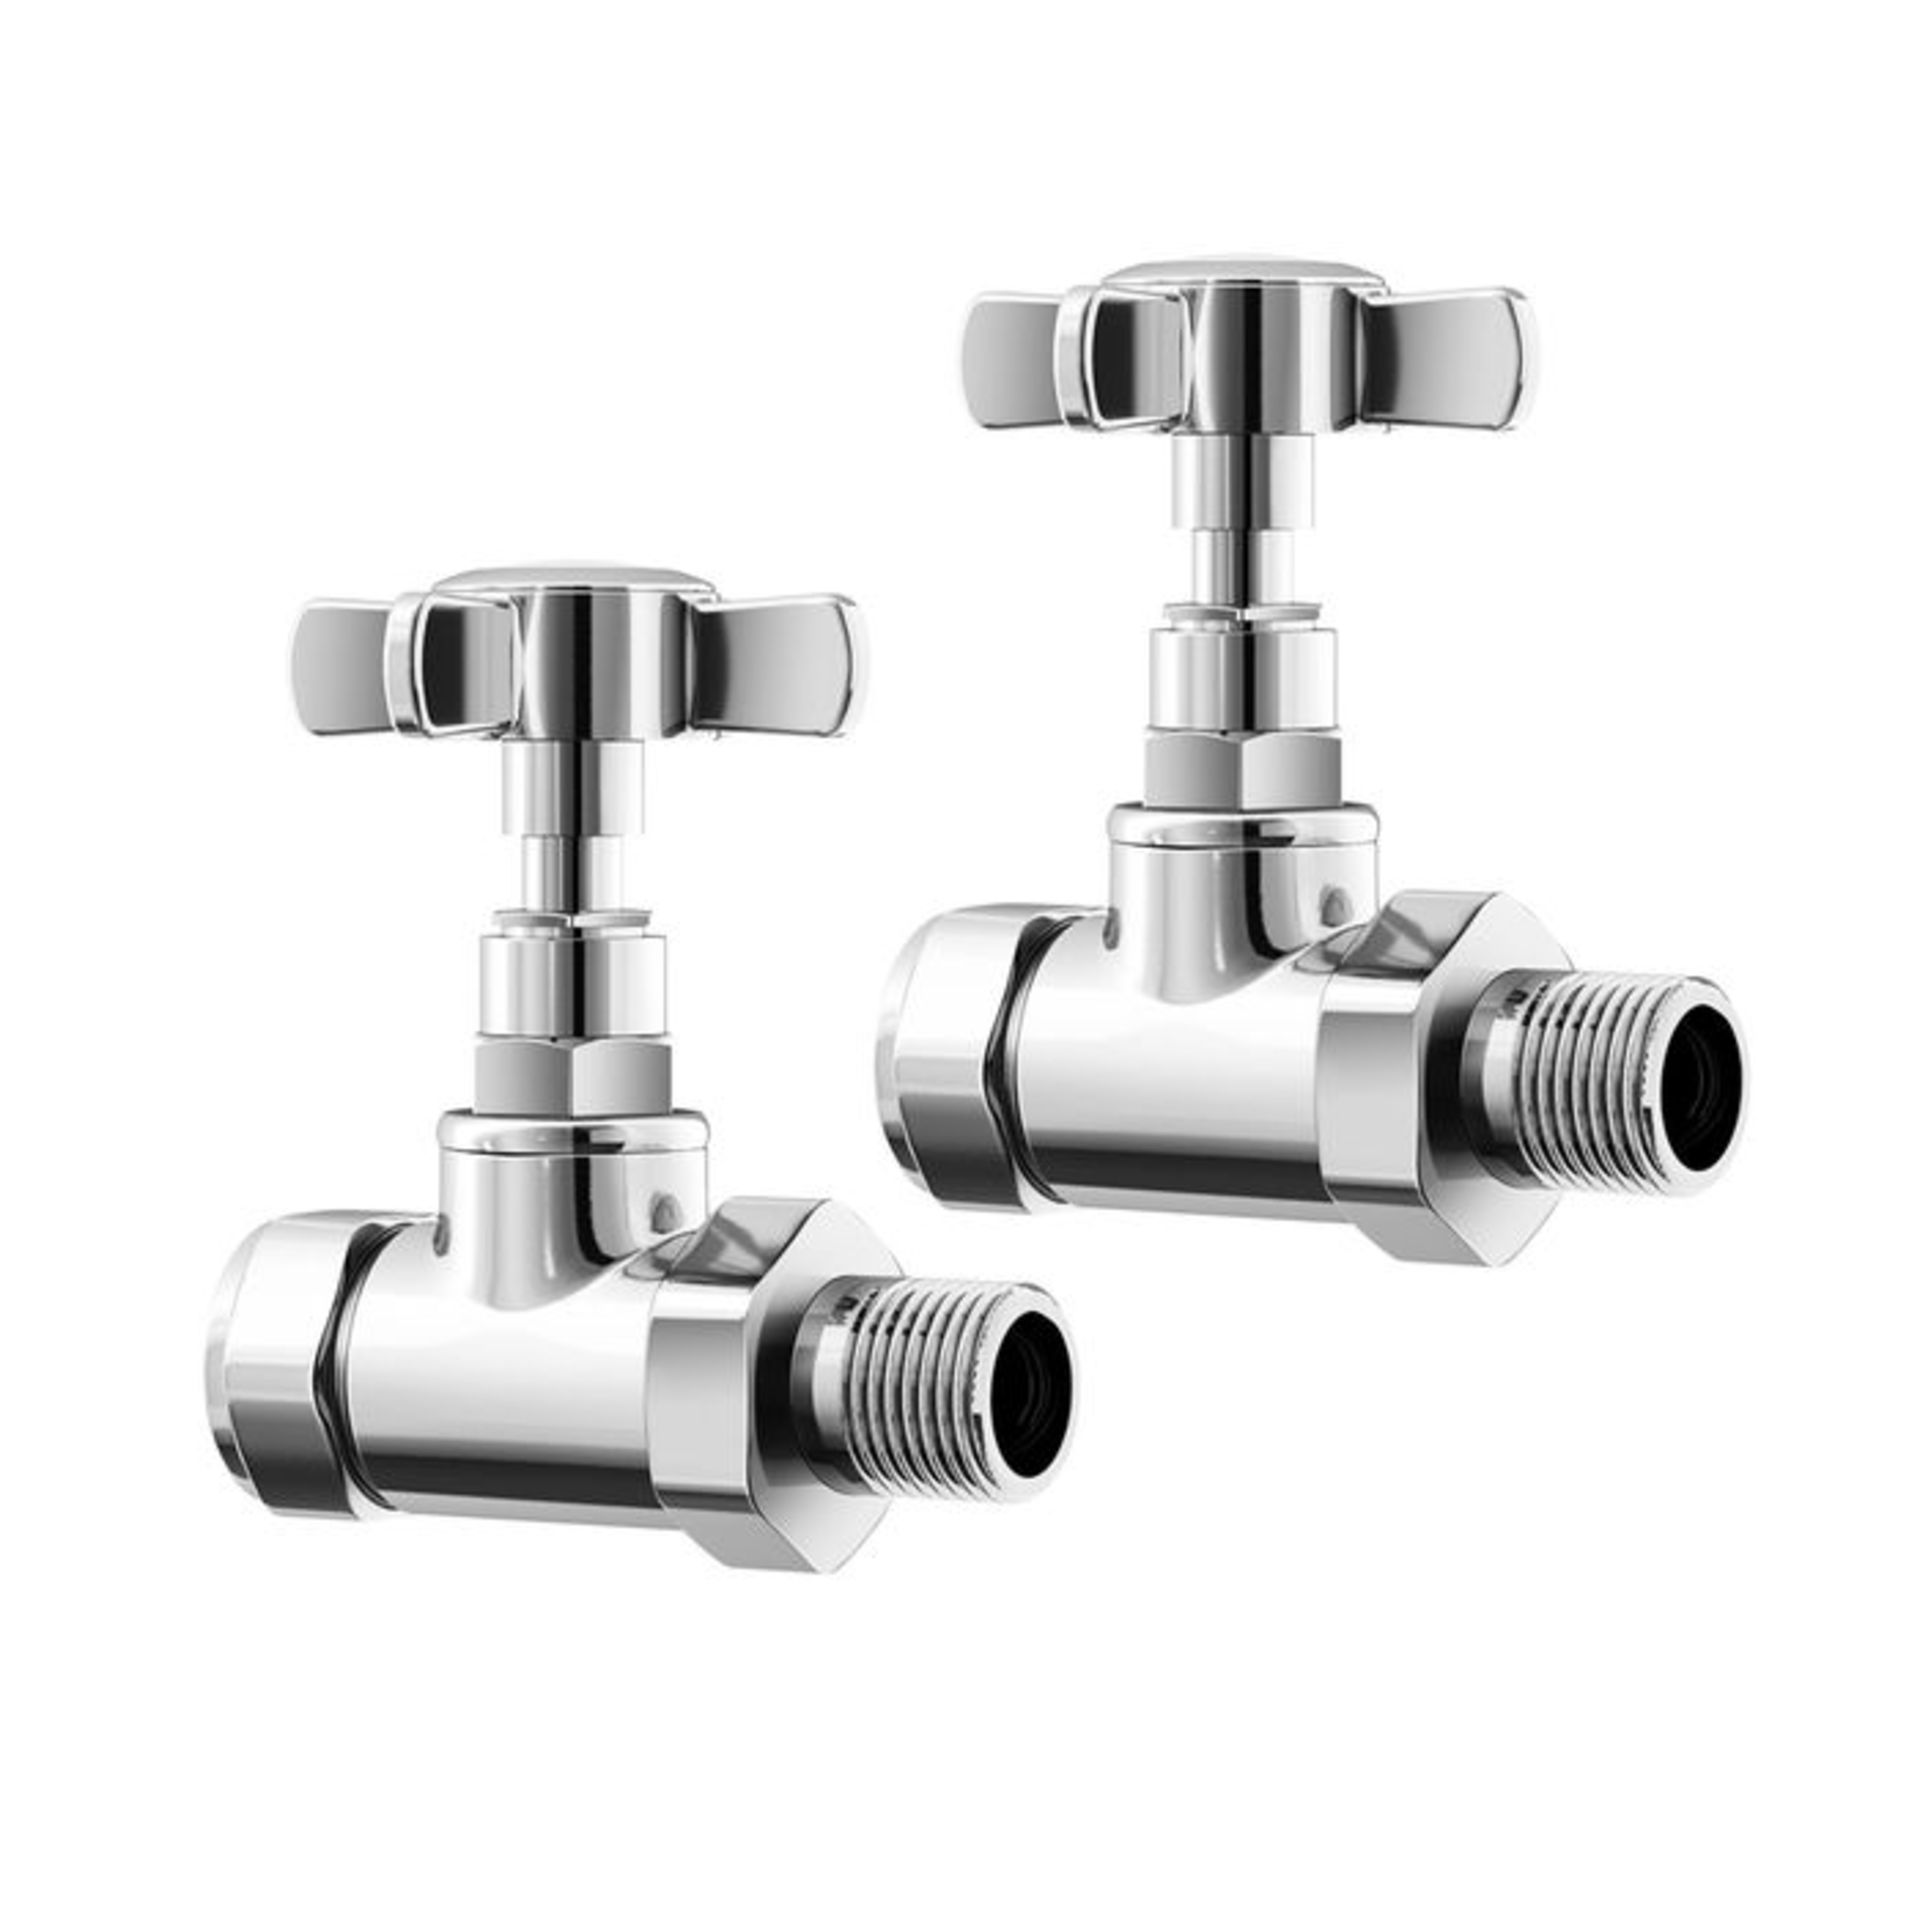 (R1036) 15mm Standard Connection Straight Polished Chrome Radiator Valves Chrome Plated Solid - Image 2 of 4